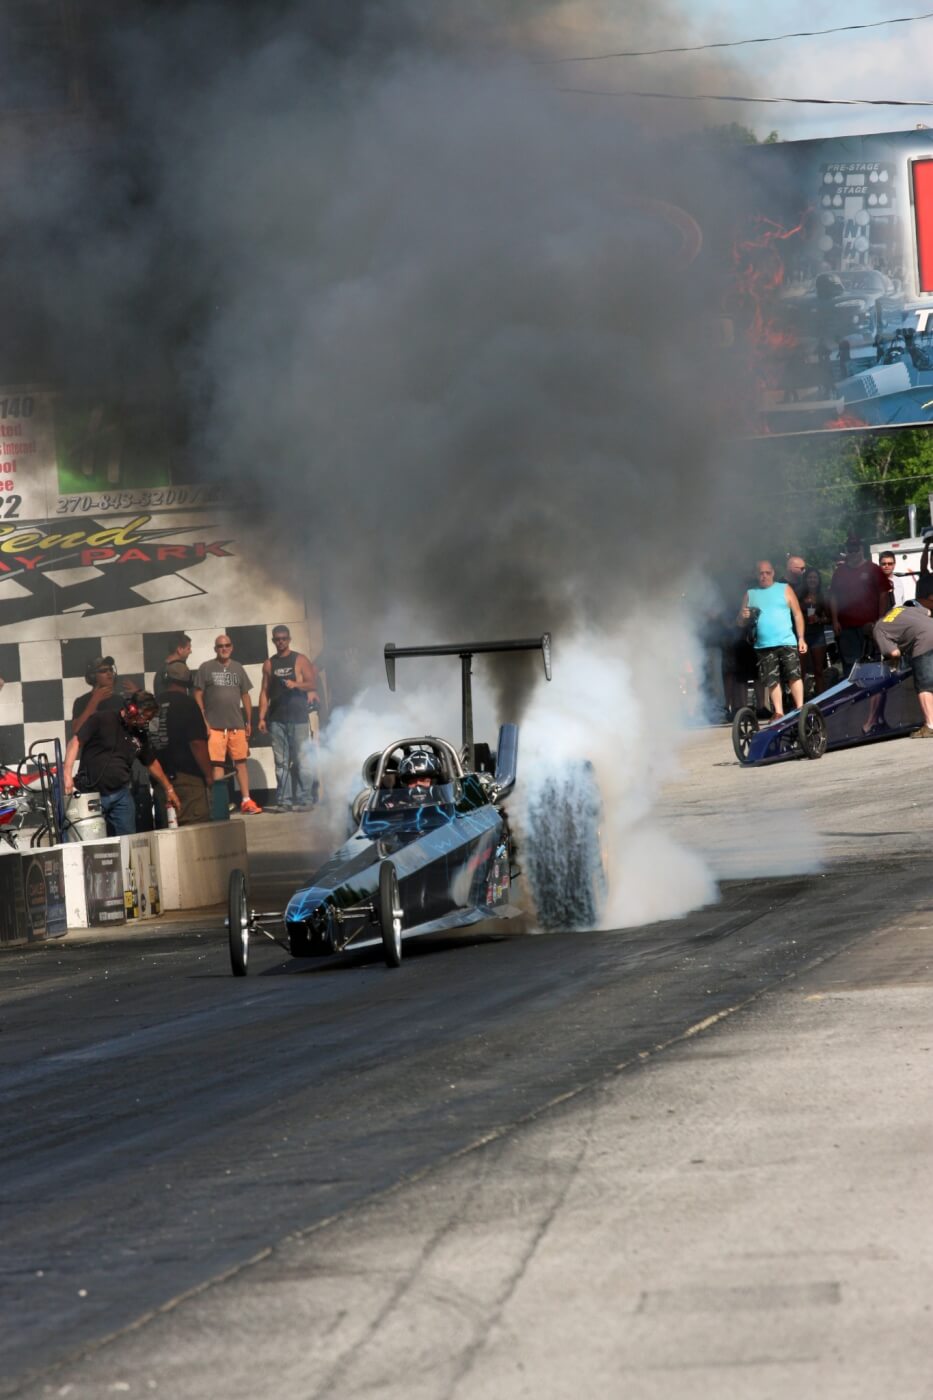 Jared Jones heats up the tires before making a pass in the Scheid Diesel dragster. He went over 200 mph while flying down the track.